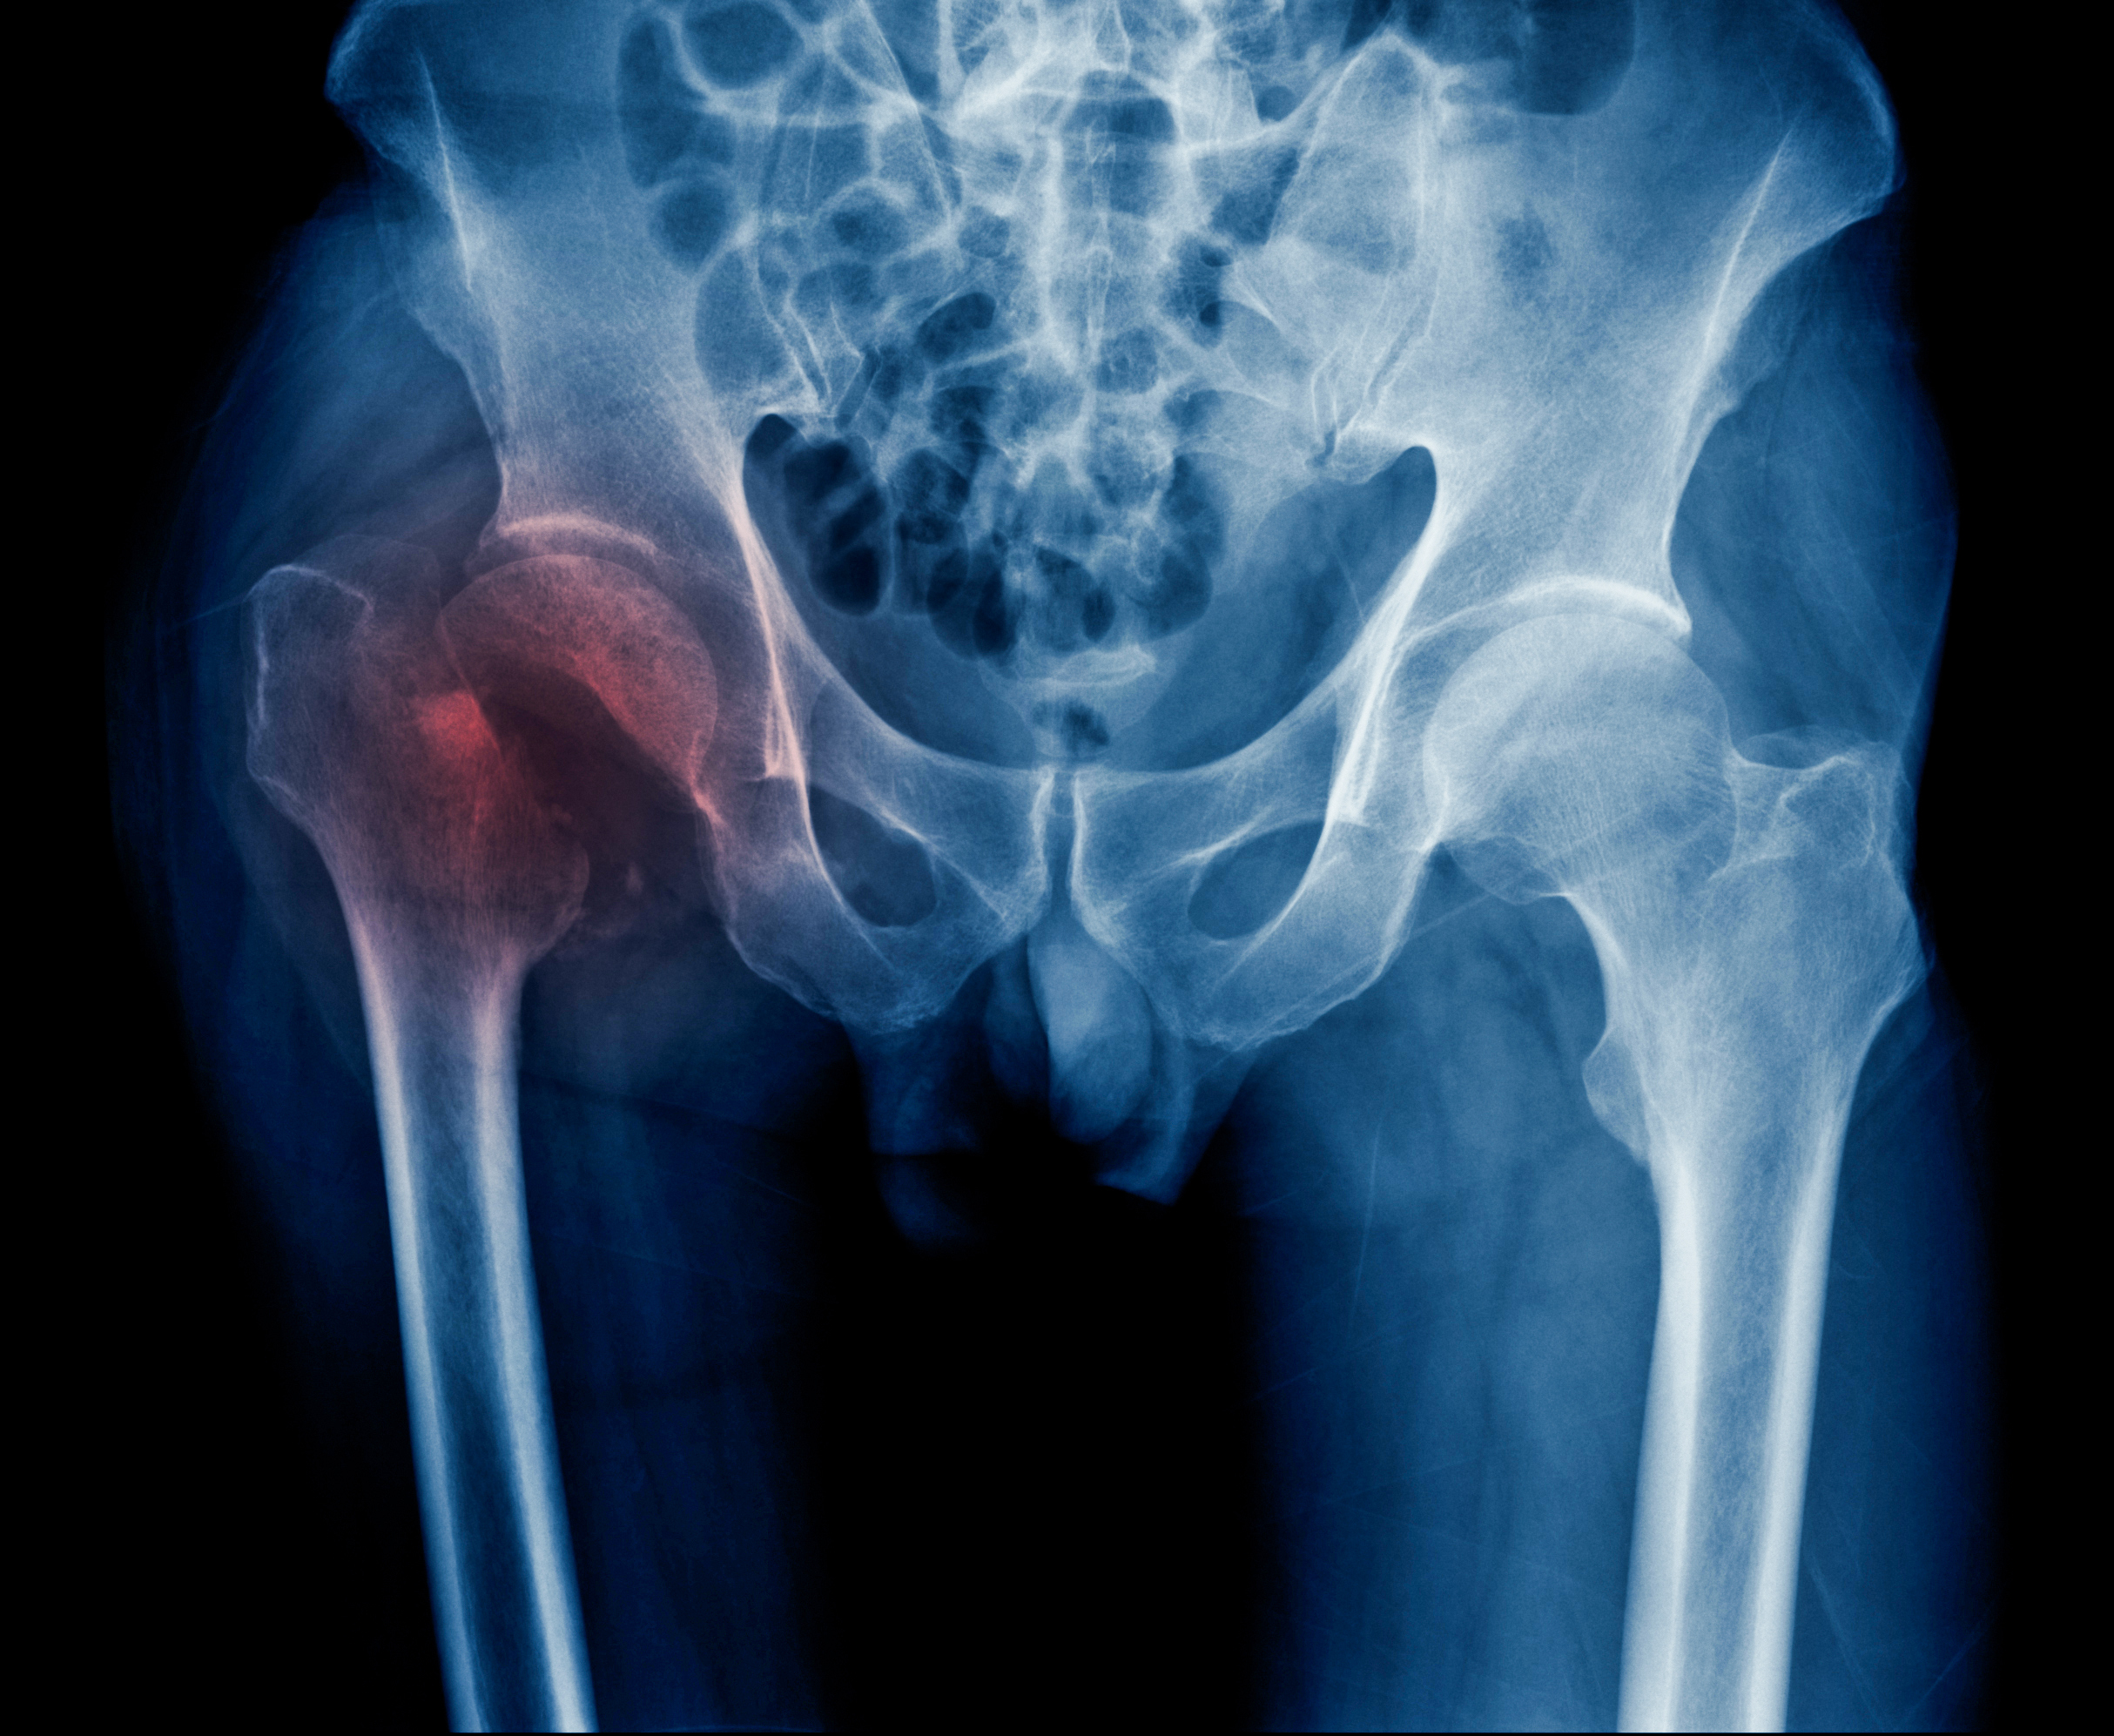 X-ray image of a human pelvis showing a noticeable fracture or abnormality on the left femur near the hip joint